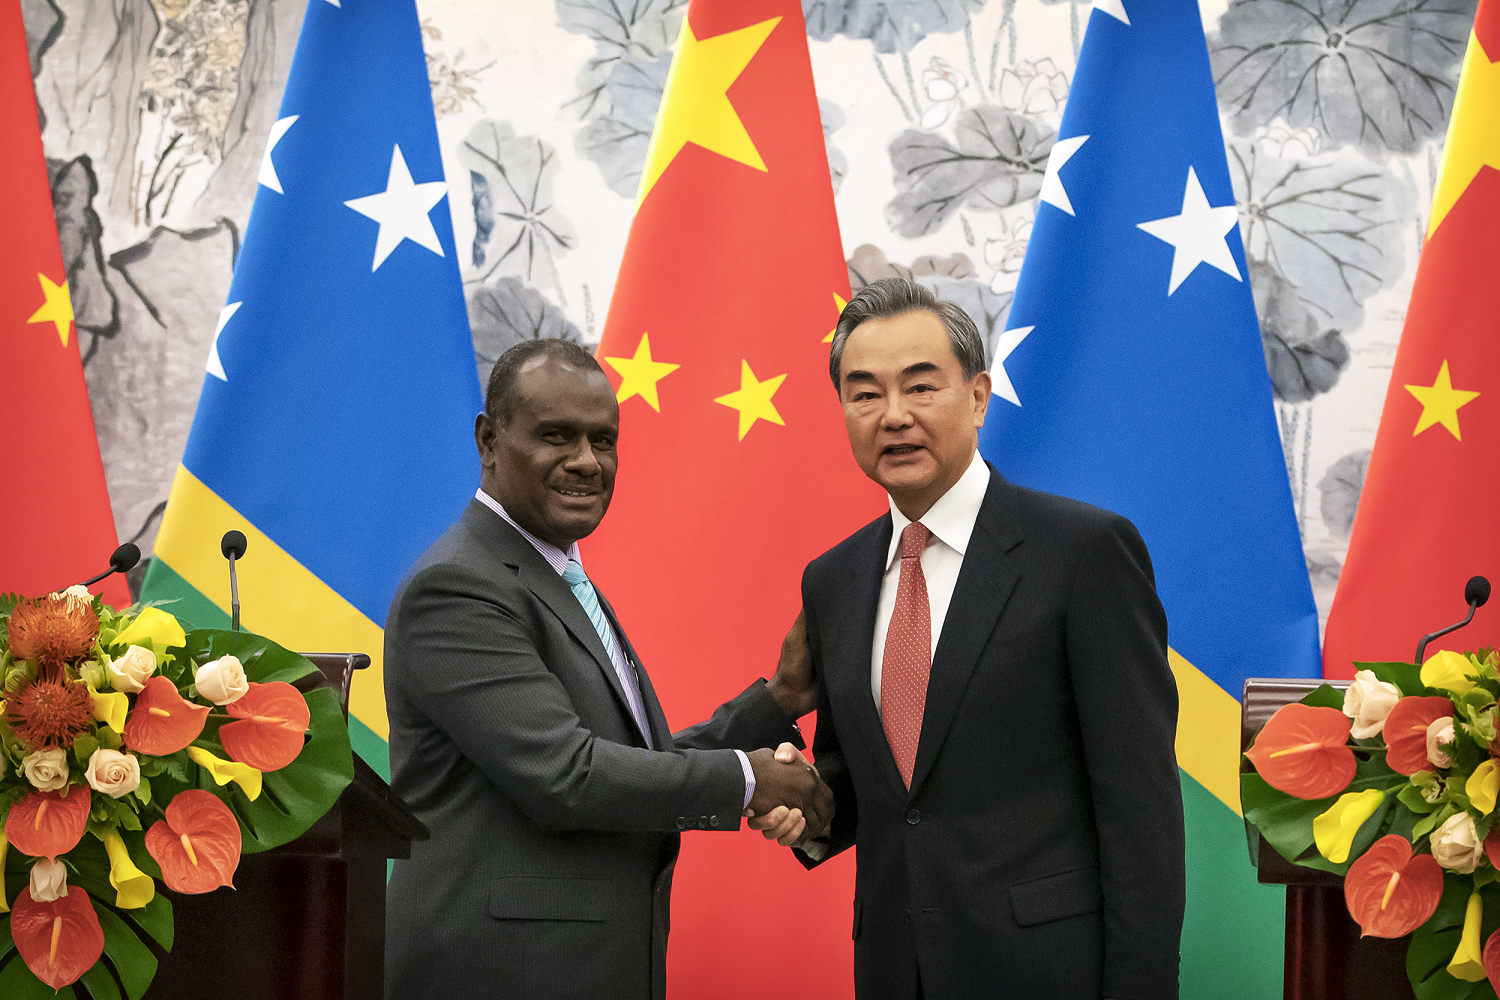 Solomon Islands elects a prime minister who is likely to keep close China ties